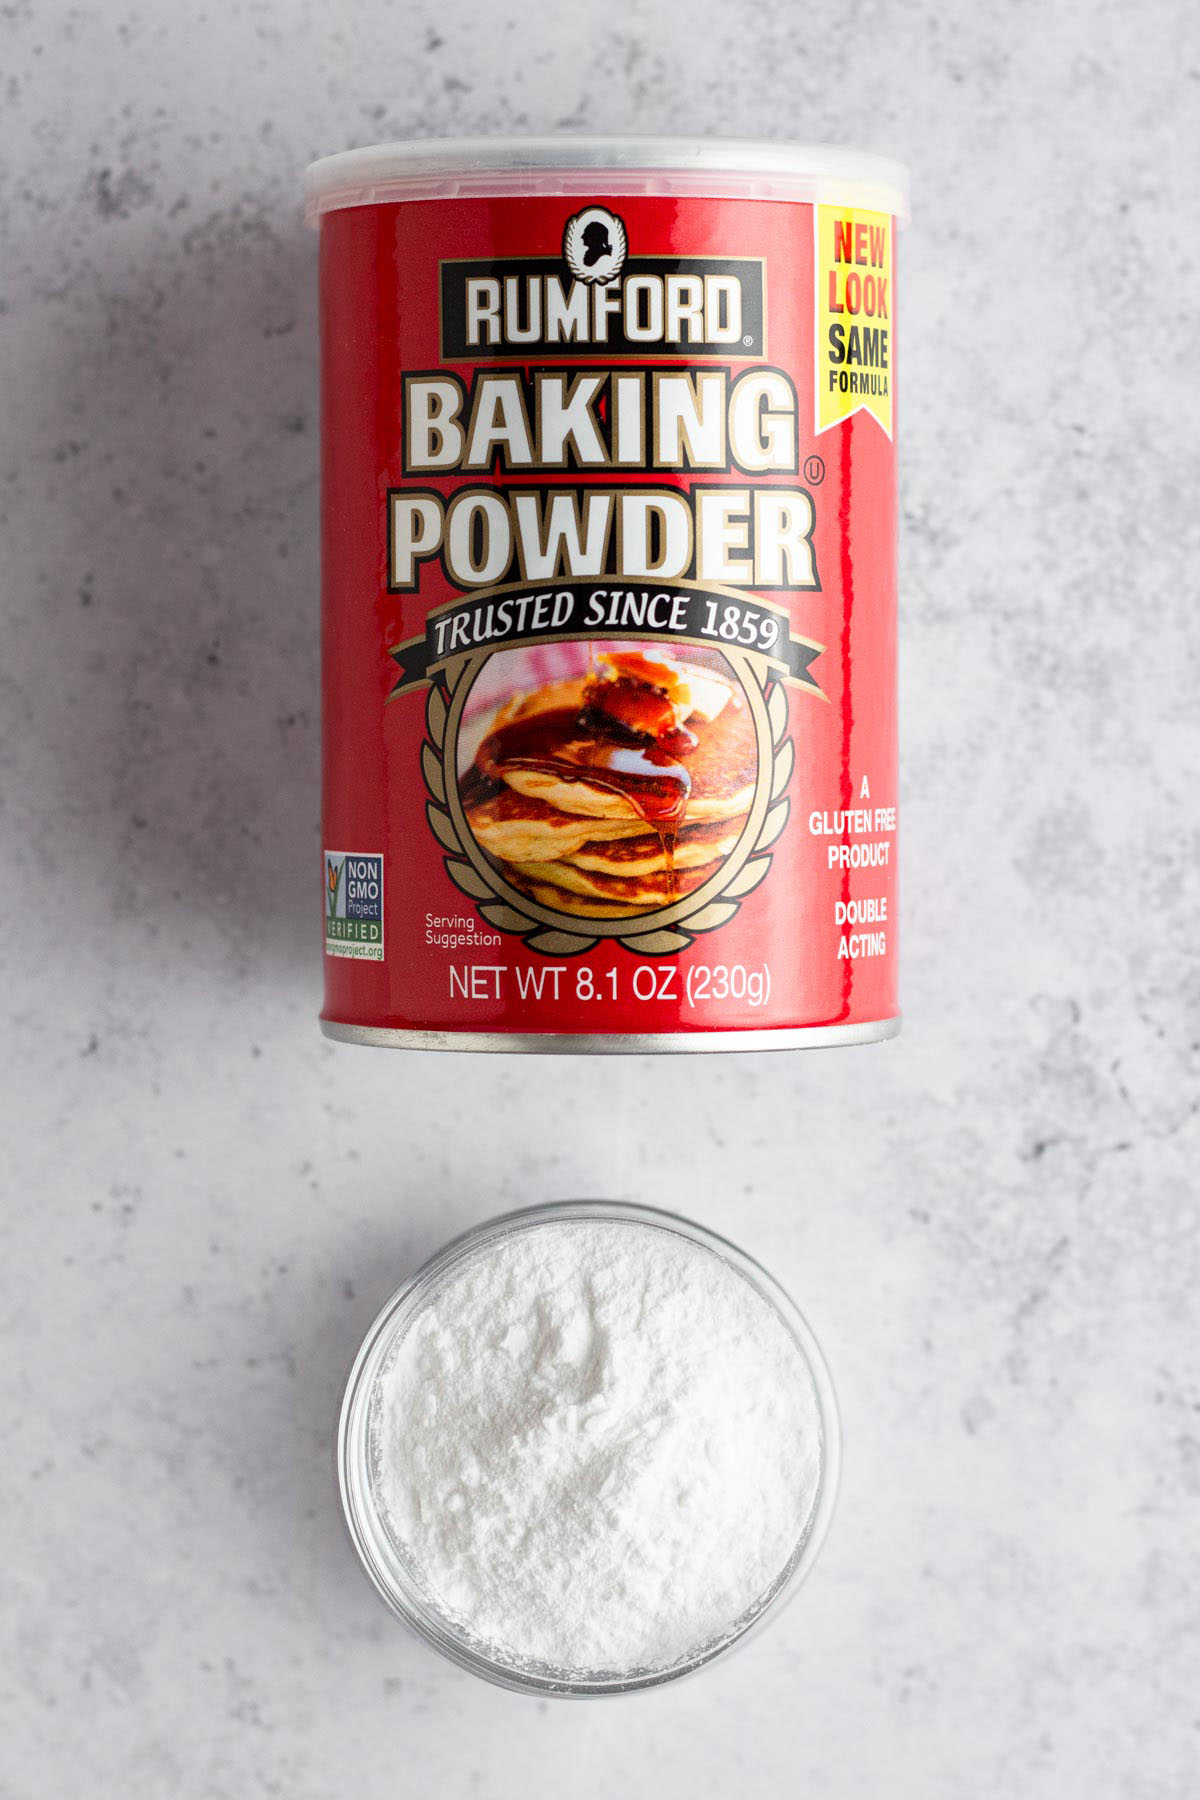 A can of baking powder with a small glass bowl of baking powder.